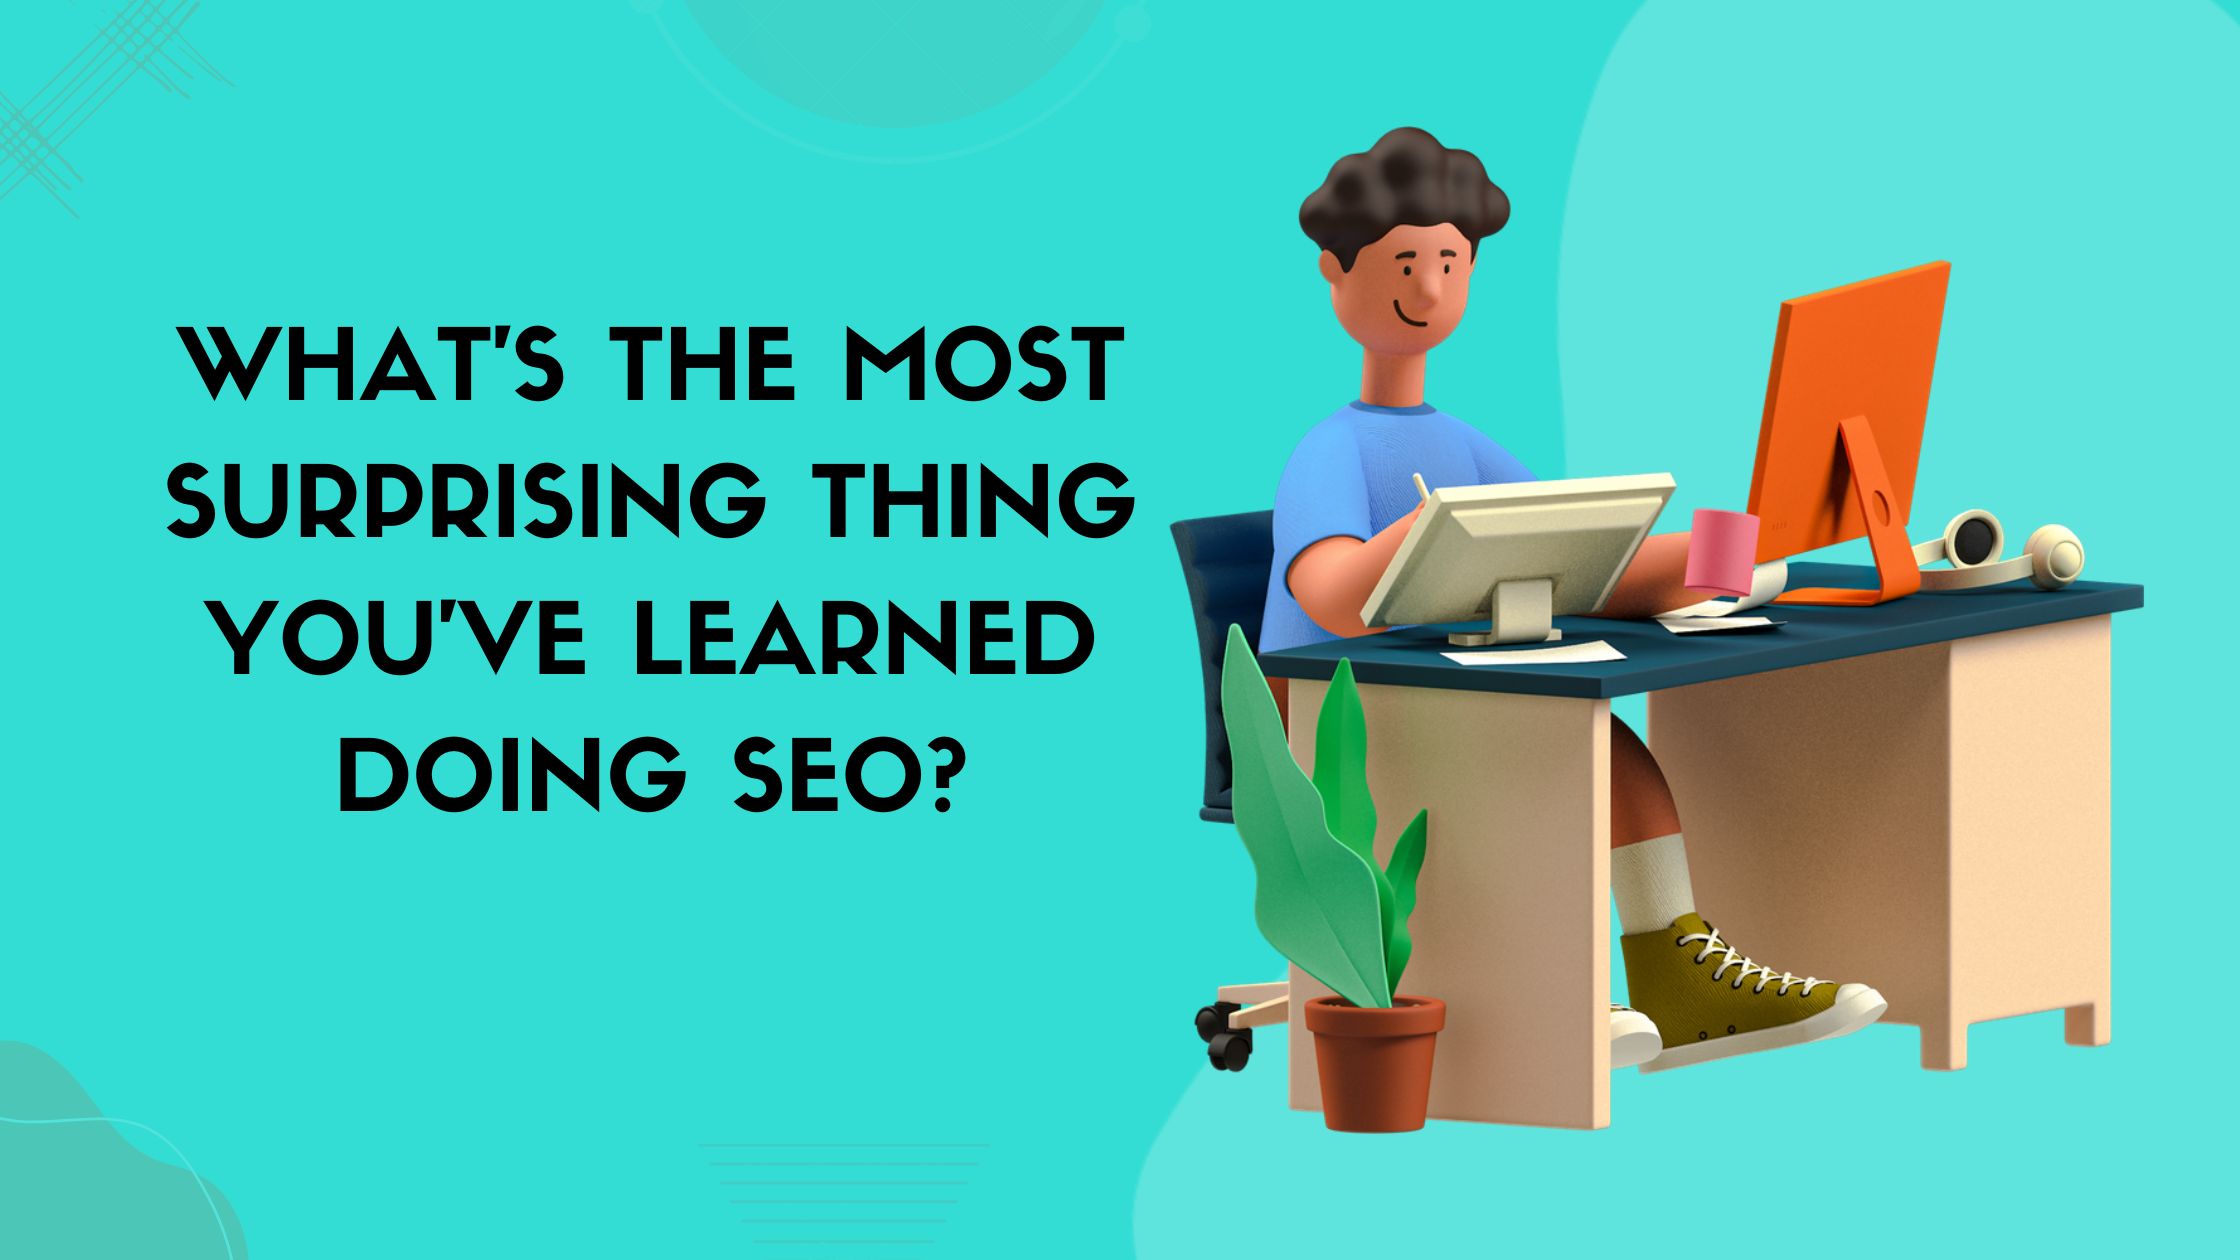 What’s The Most Surprising Thing You’ve Learned Doing SEO?